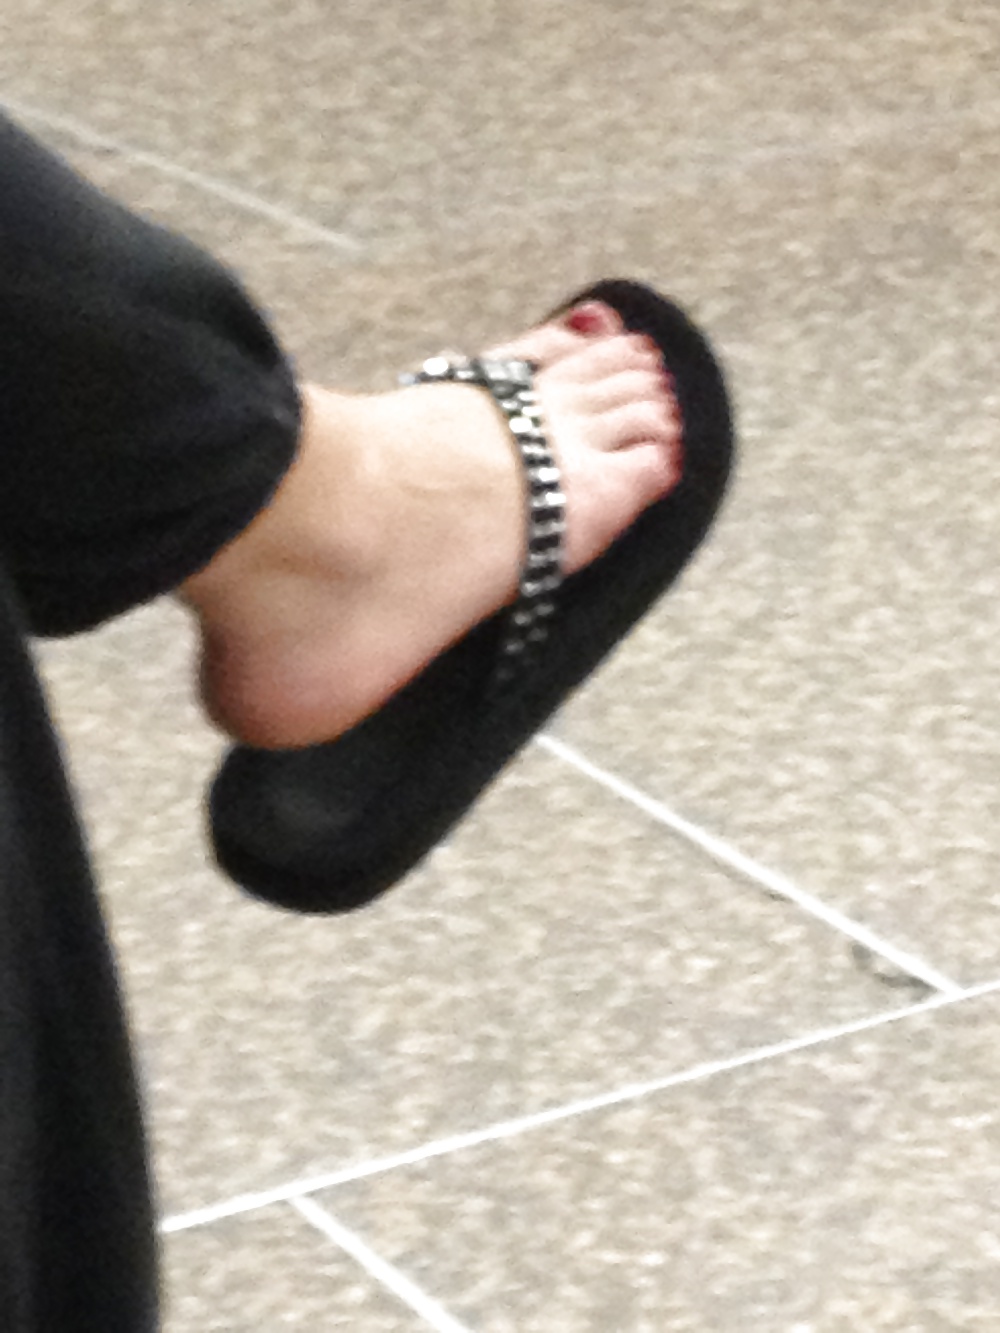 This Blonde's TOES were driving me wild at the airport #14033283